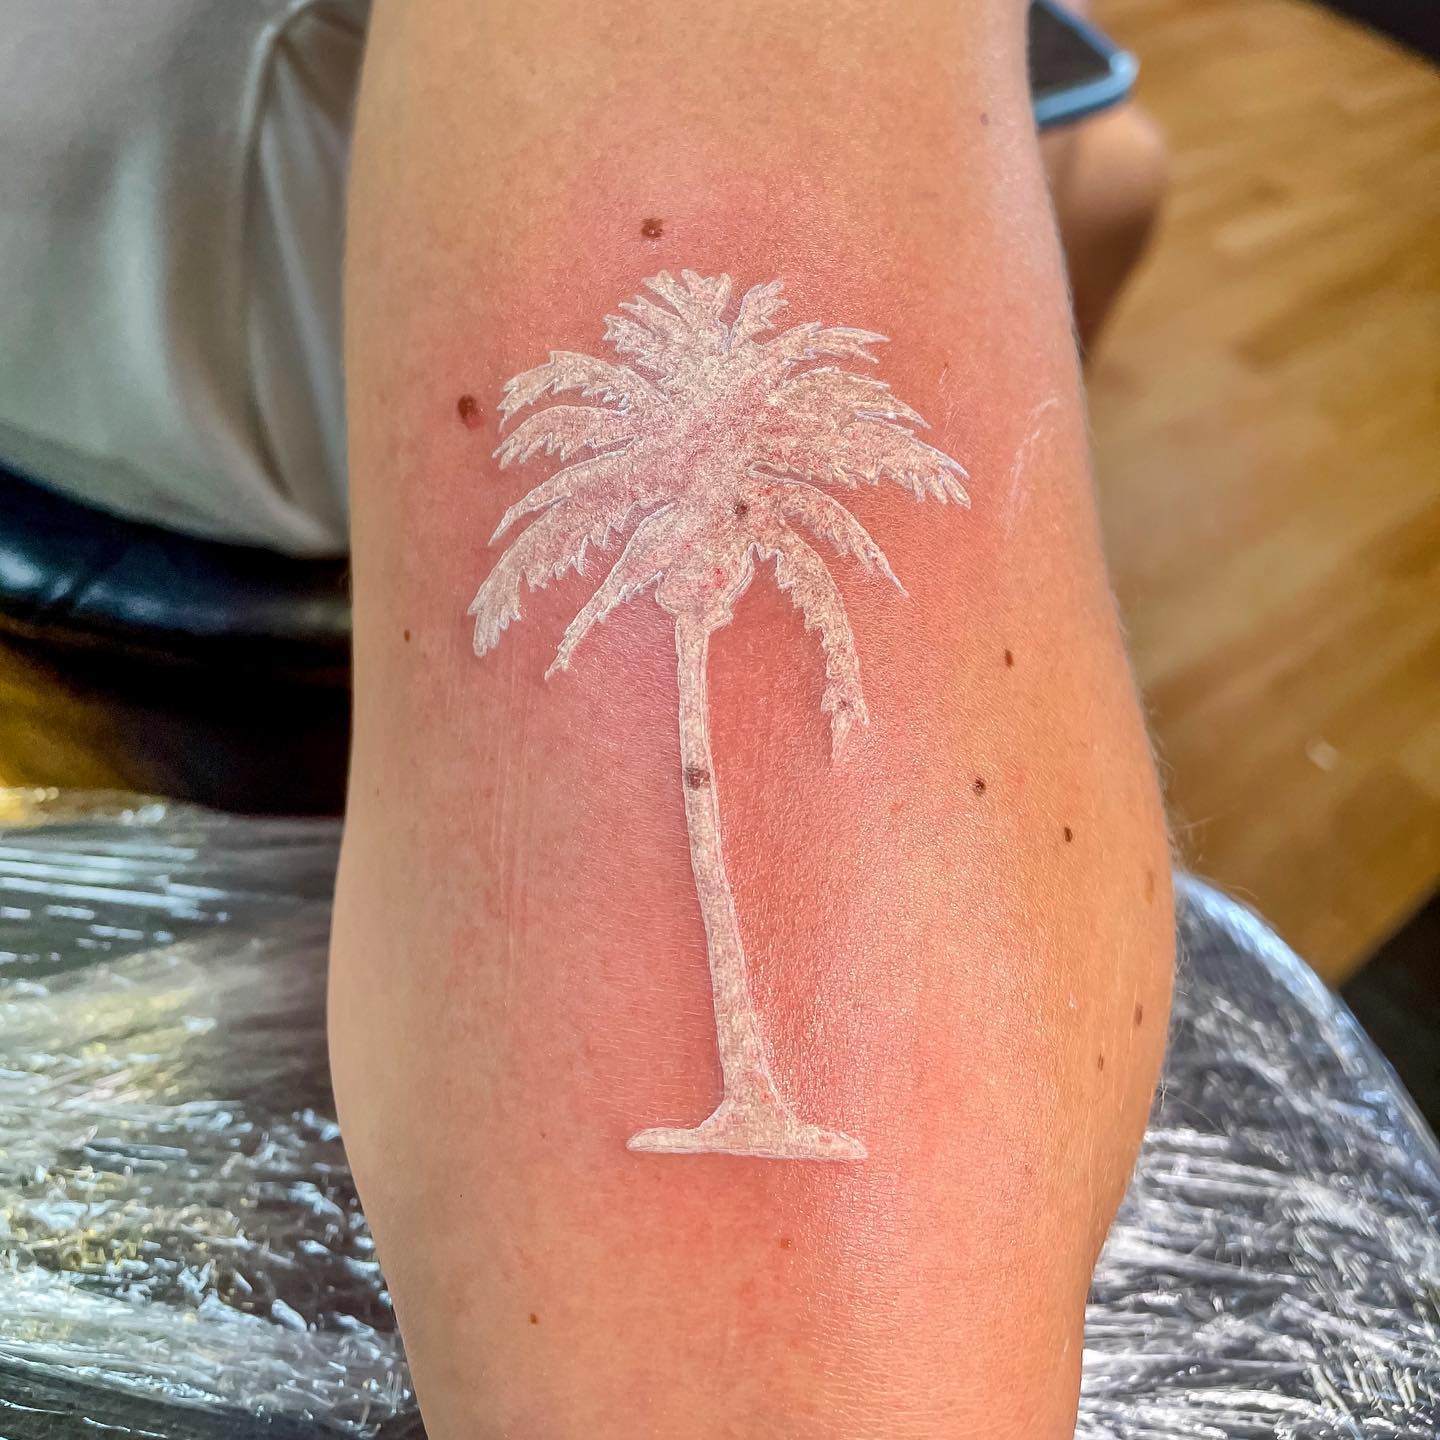 Palm tree tattoos represent two things: regeneration and immortality. No matter for which symbolism you get it,  a white ink palm tree is sure to make you feel great. Let's go and get it!